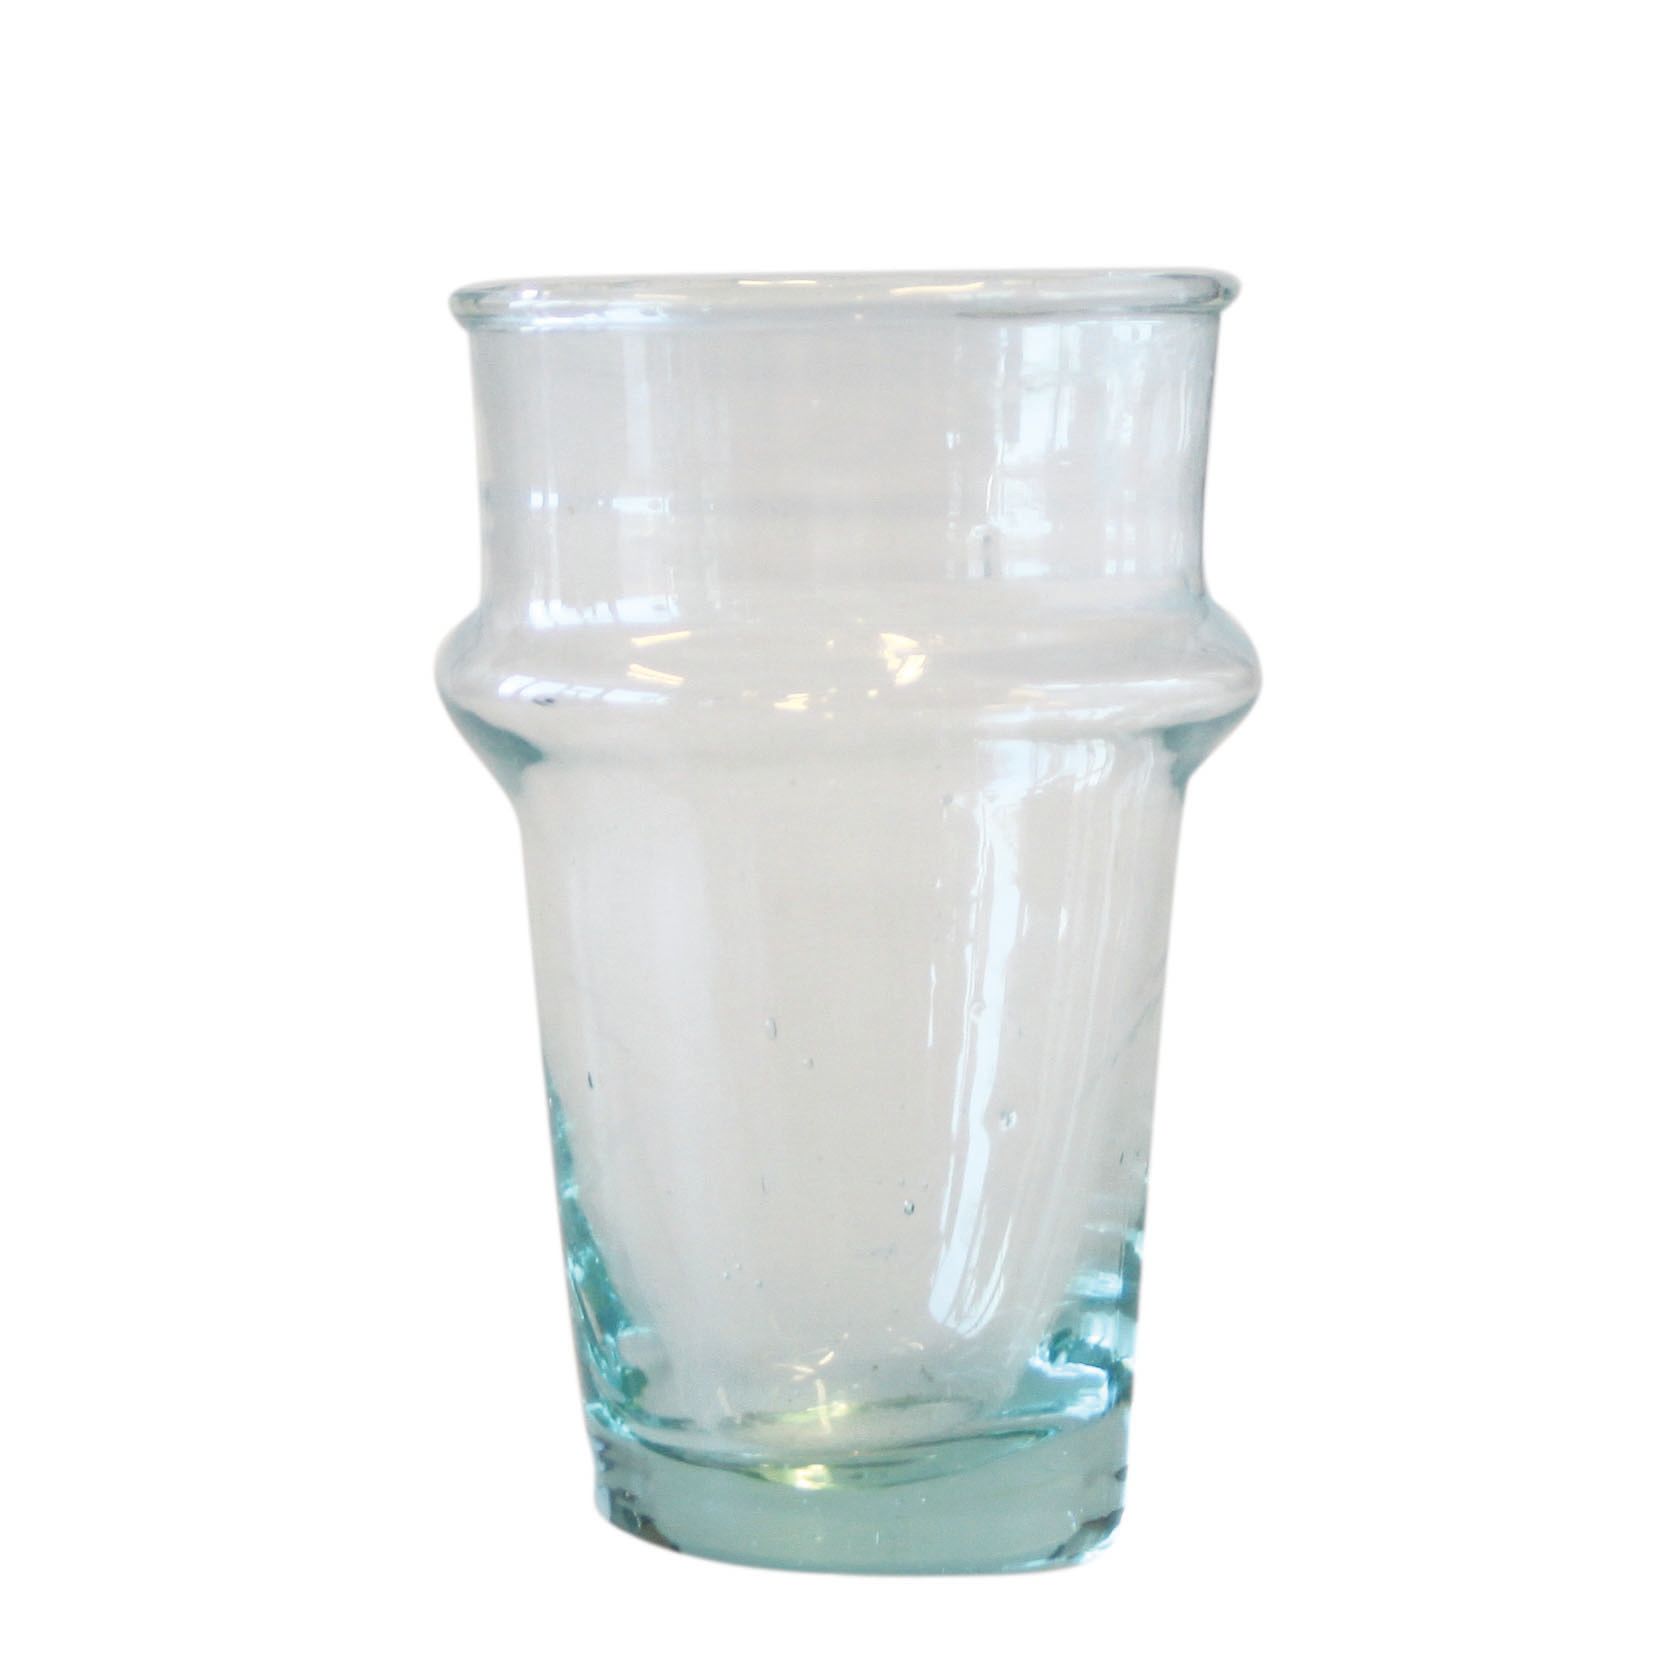 Unc Recycled Glass Marocco D7x11.5 Cm Gift